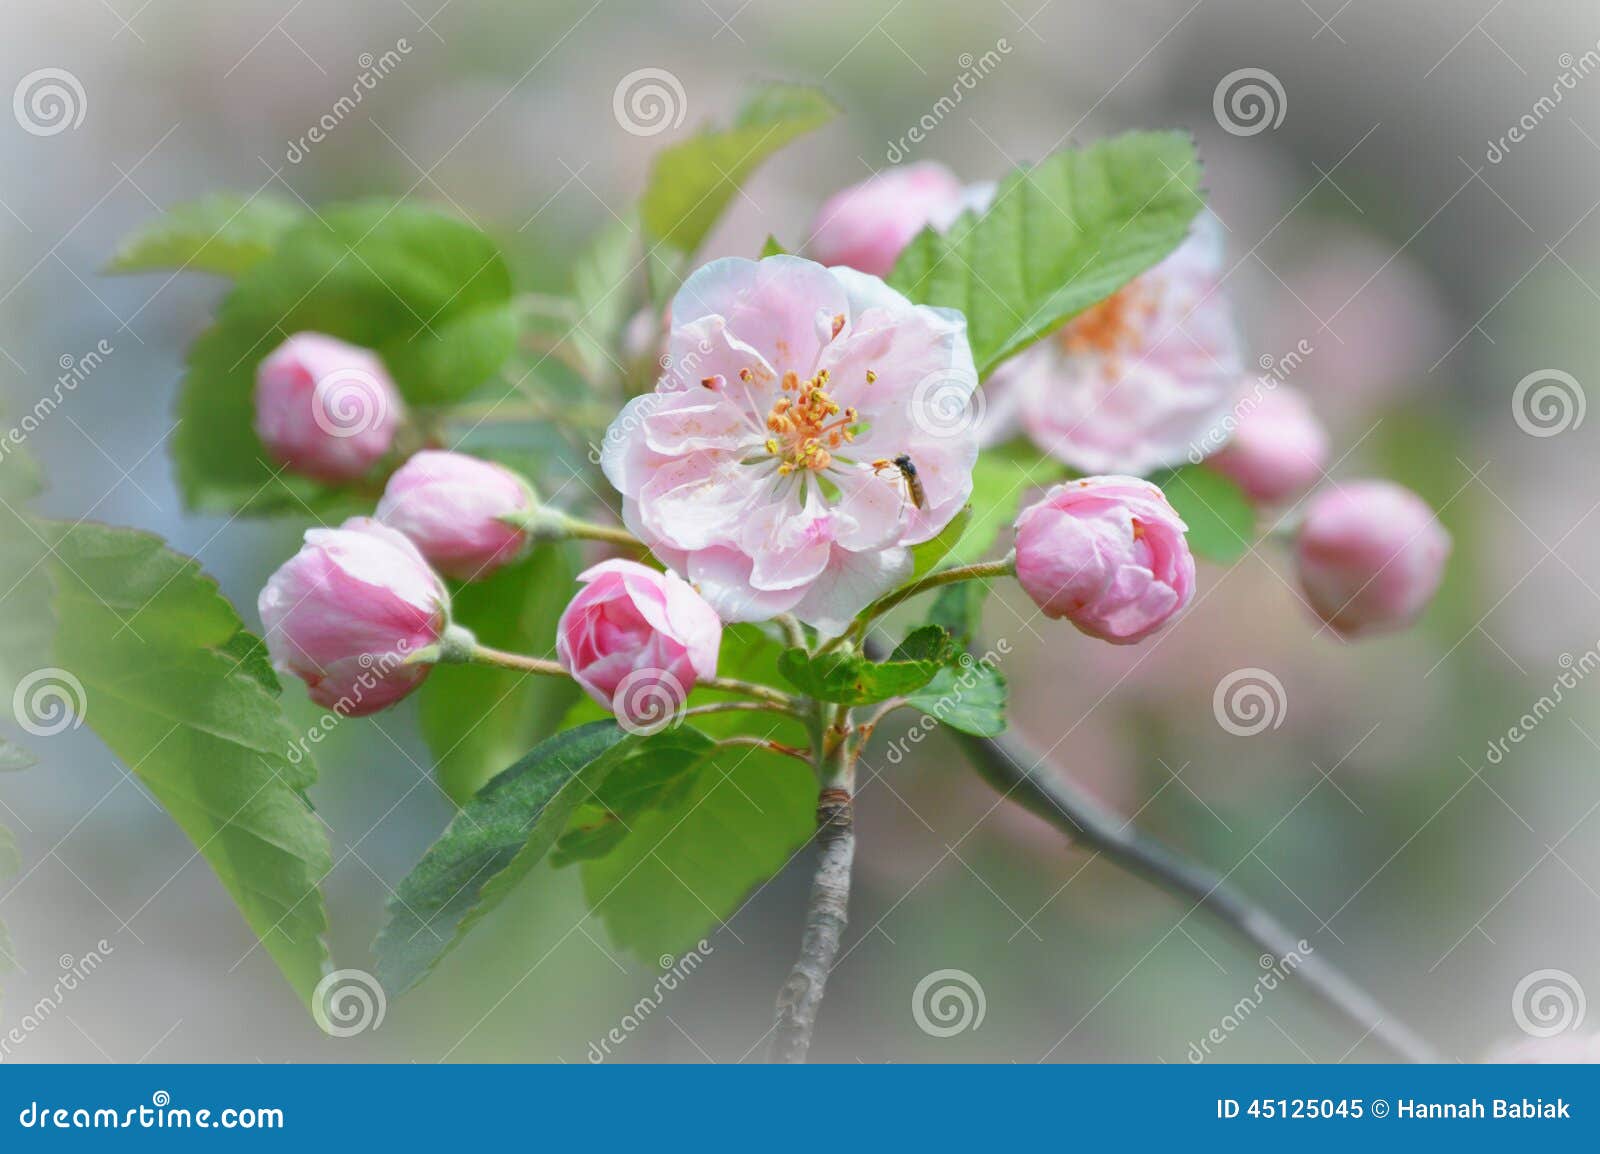 pink apple blossoms with small bee pollinating